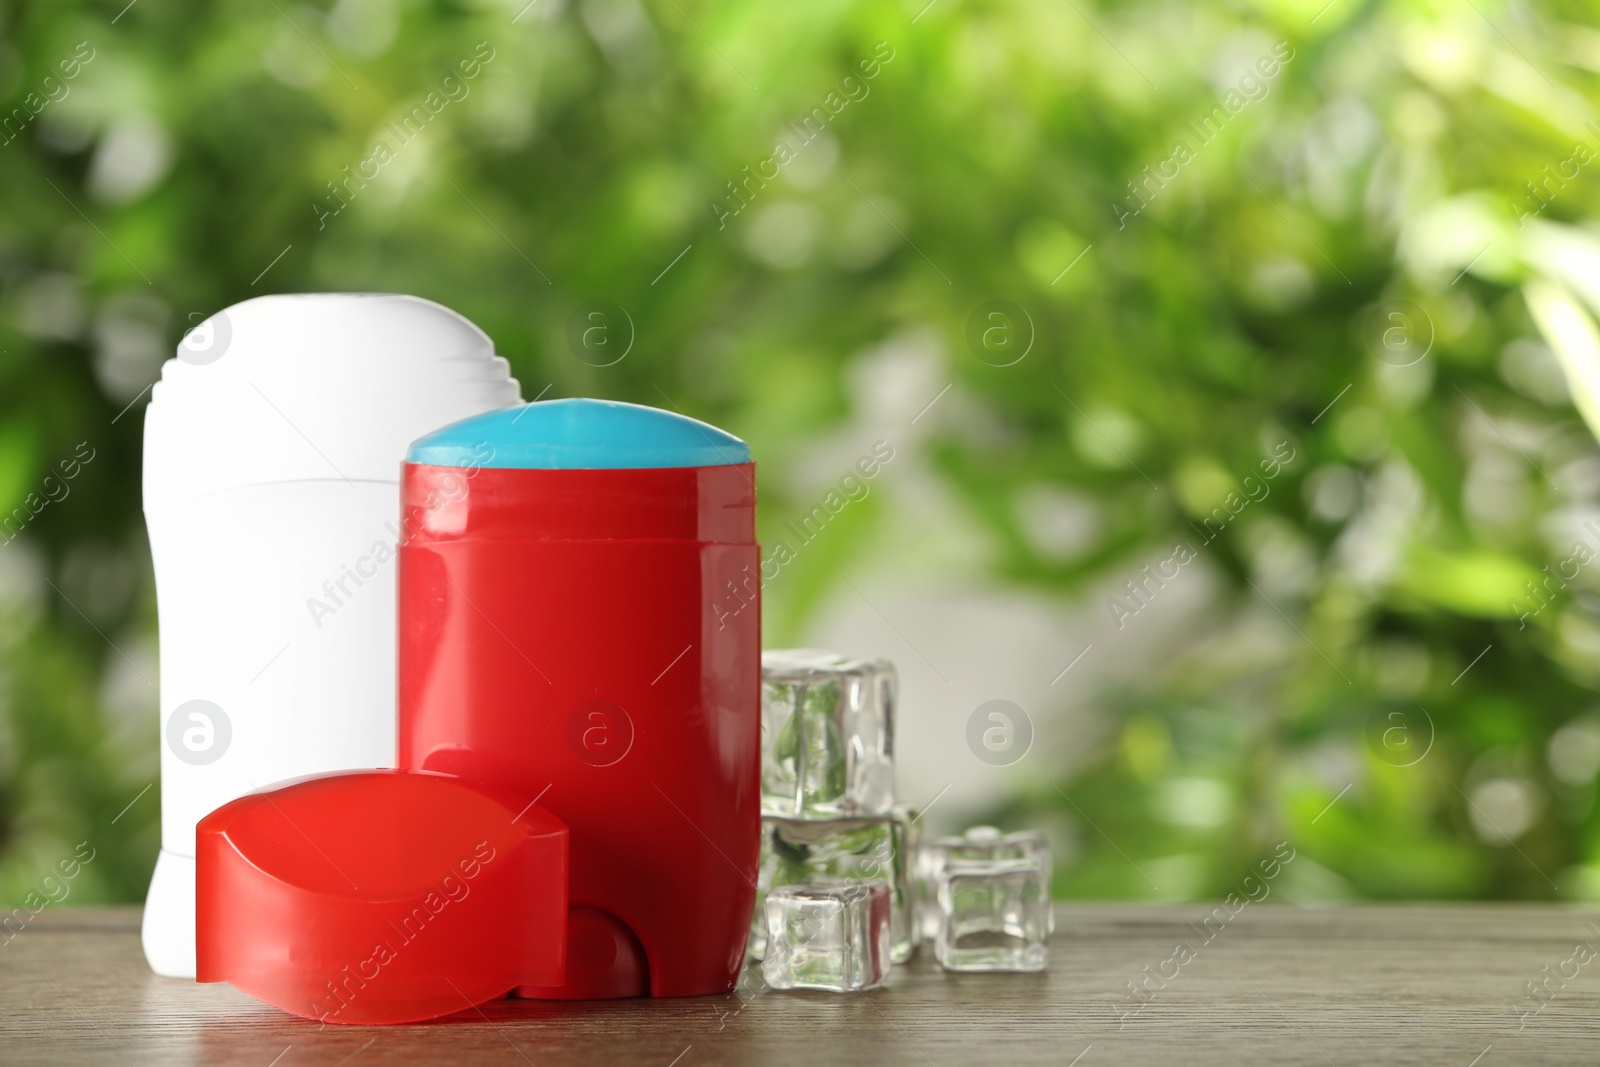 Photo of Different deodorants and ice cubes on wooden table against blurred background. Space for text